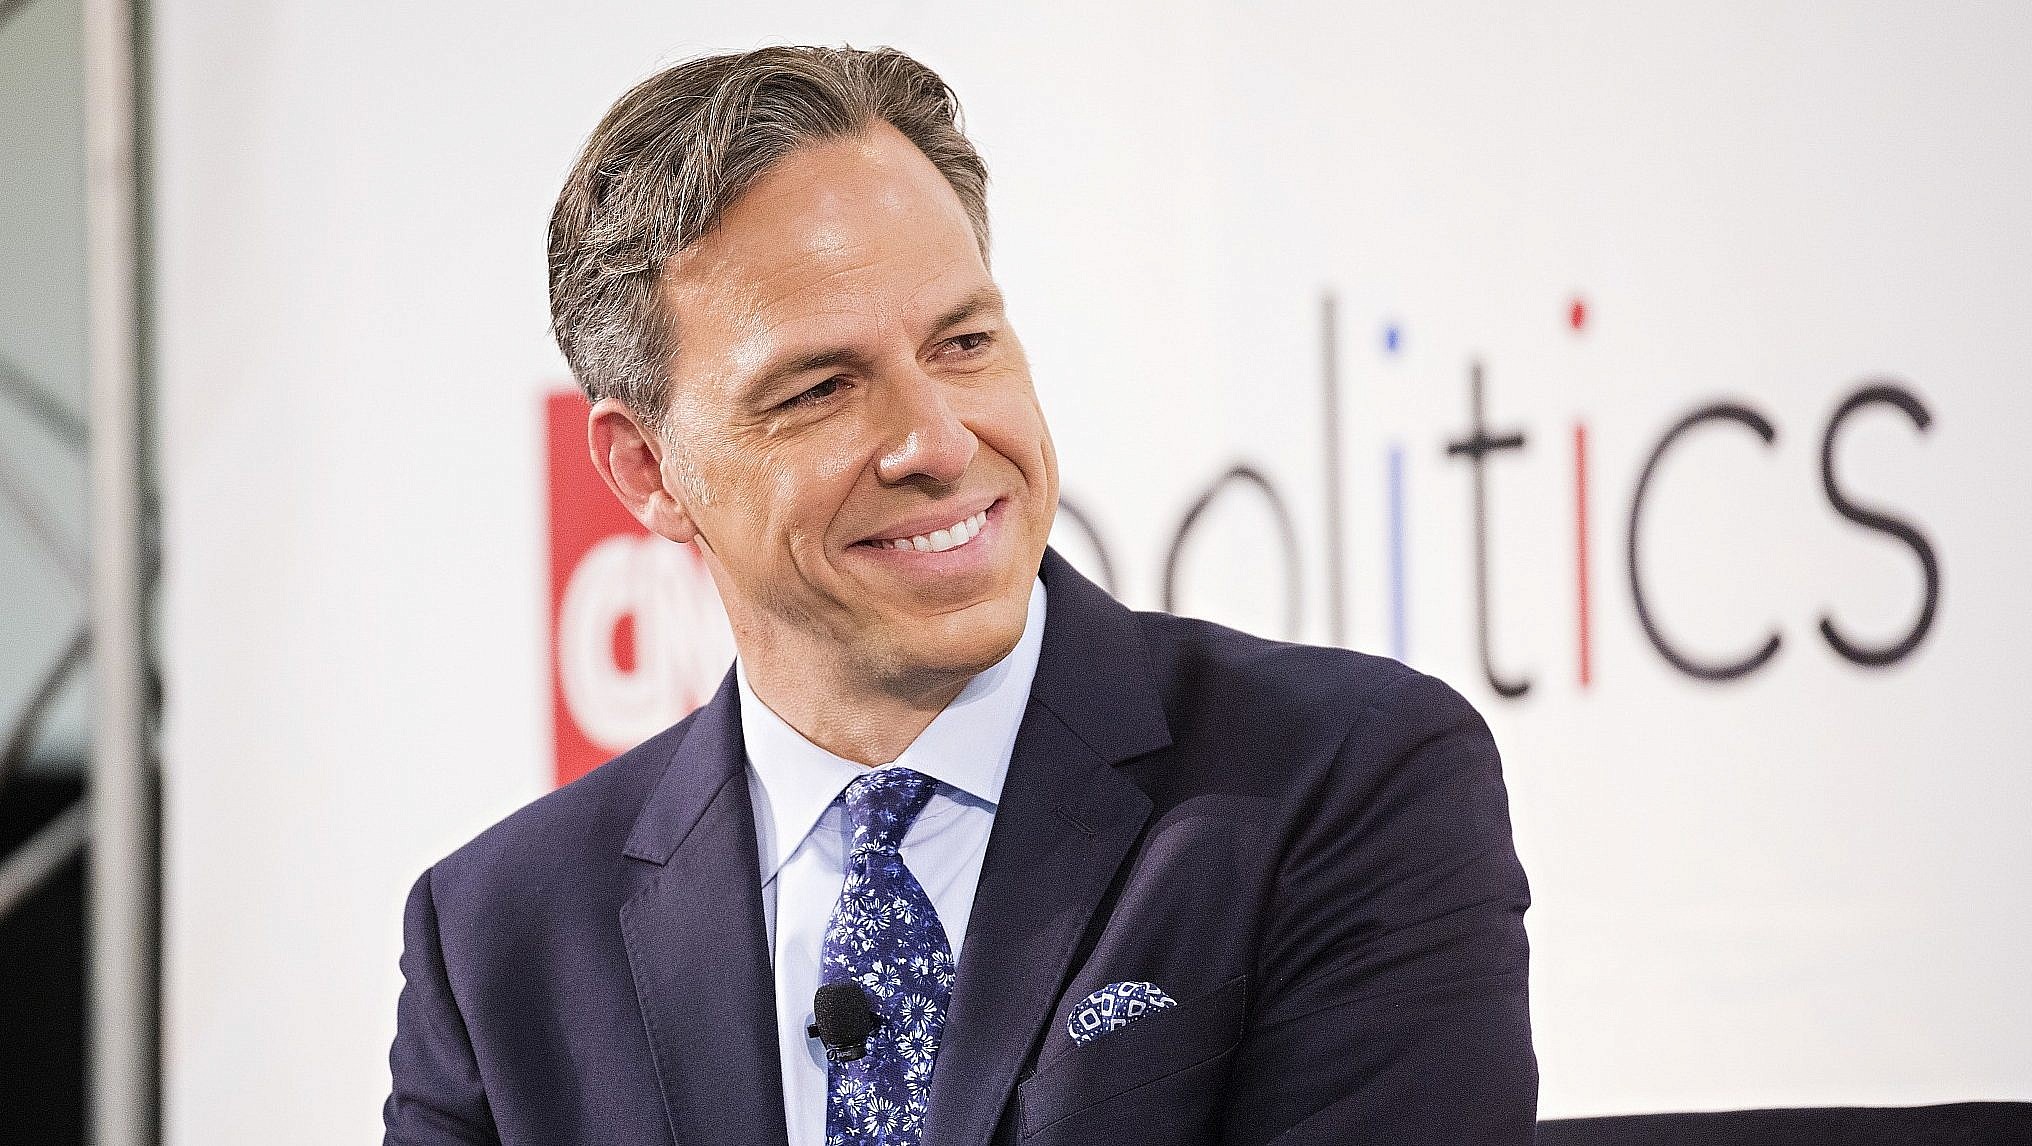 PODCAST Hear How CNN Anchor Jake Tapper Tackles Truth In The Trump Era 